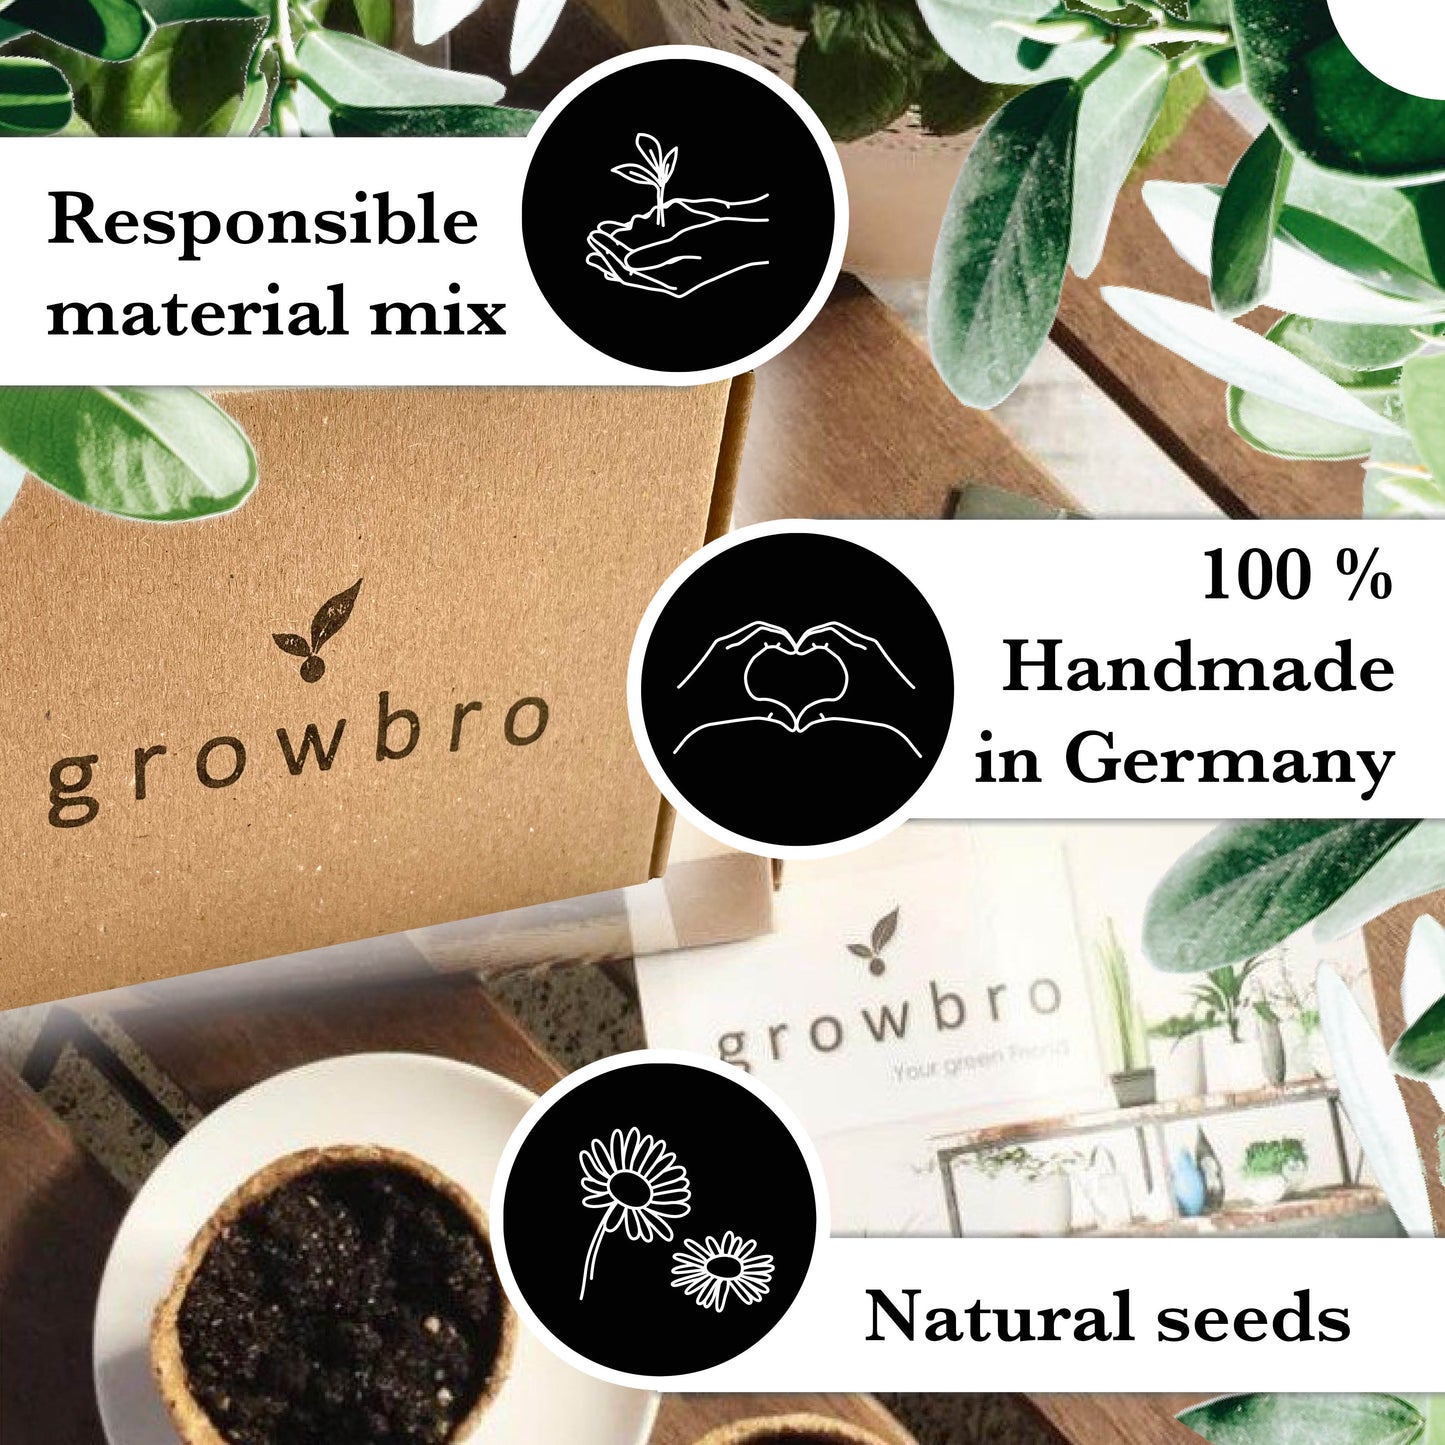 Bonsai - growbro - Wisteria Grow Kit - GROW YOUR OWN BONSAI BRO, gifts for women and men, Bonsai Starter Kit incl. seeds, spray bottle, and much more